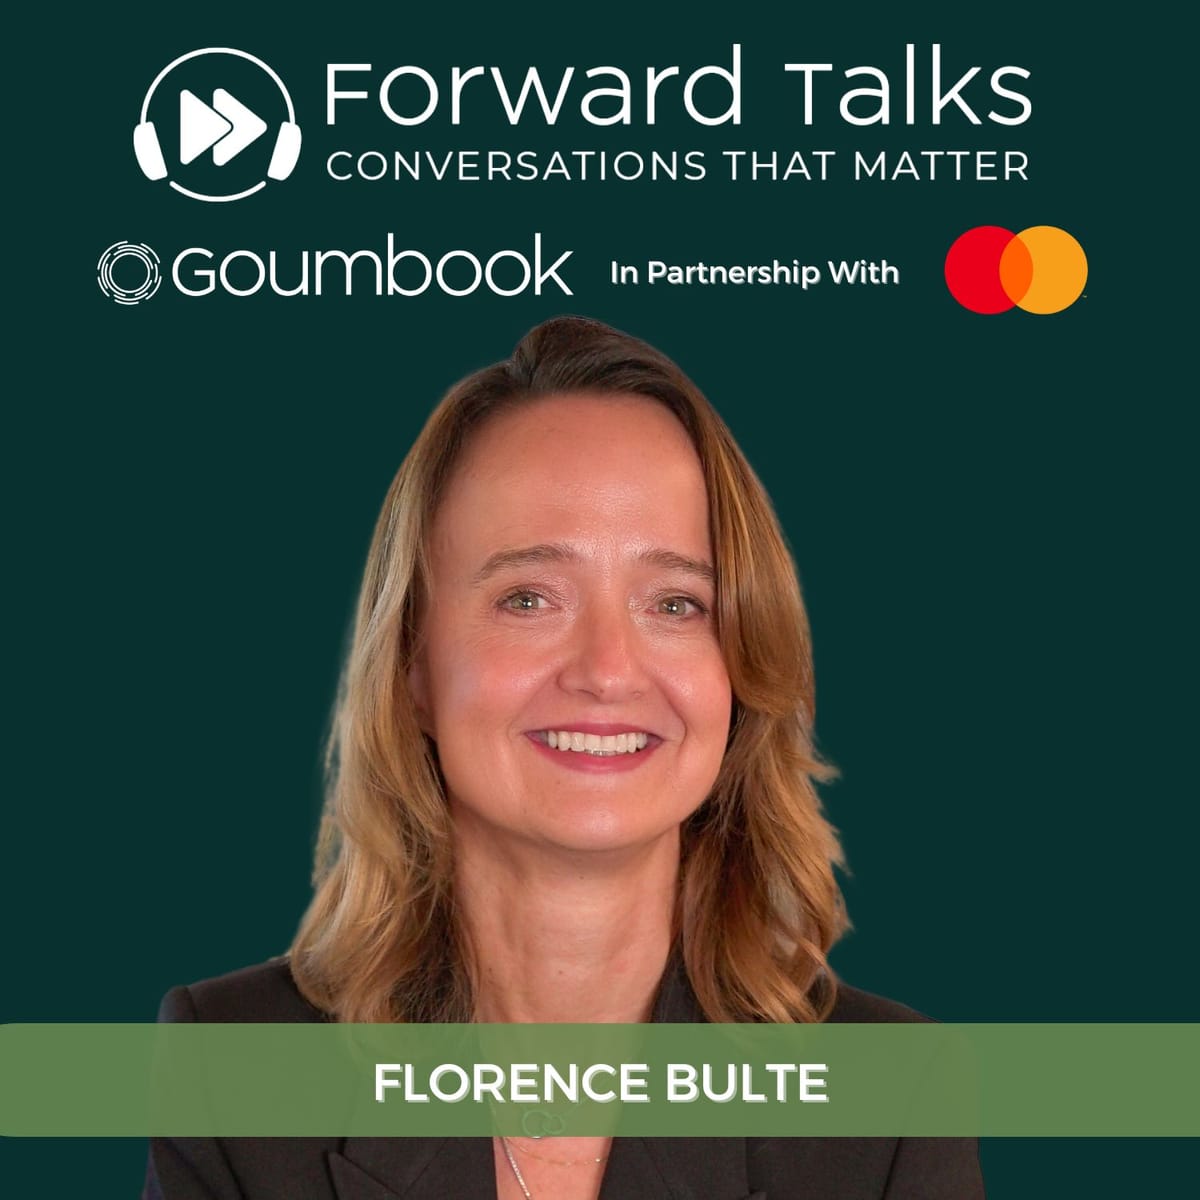 Florence Bulte on building a strong sustainability culture in luxury retail